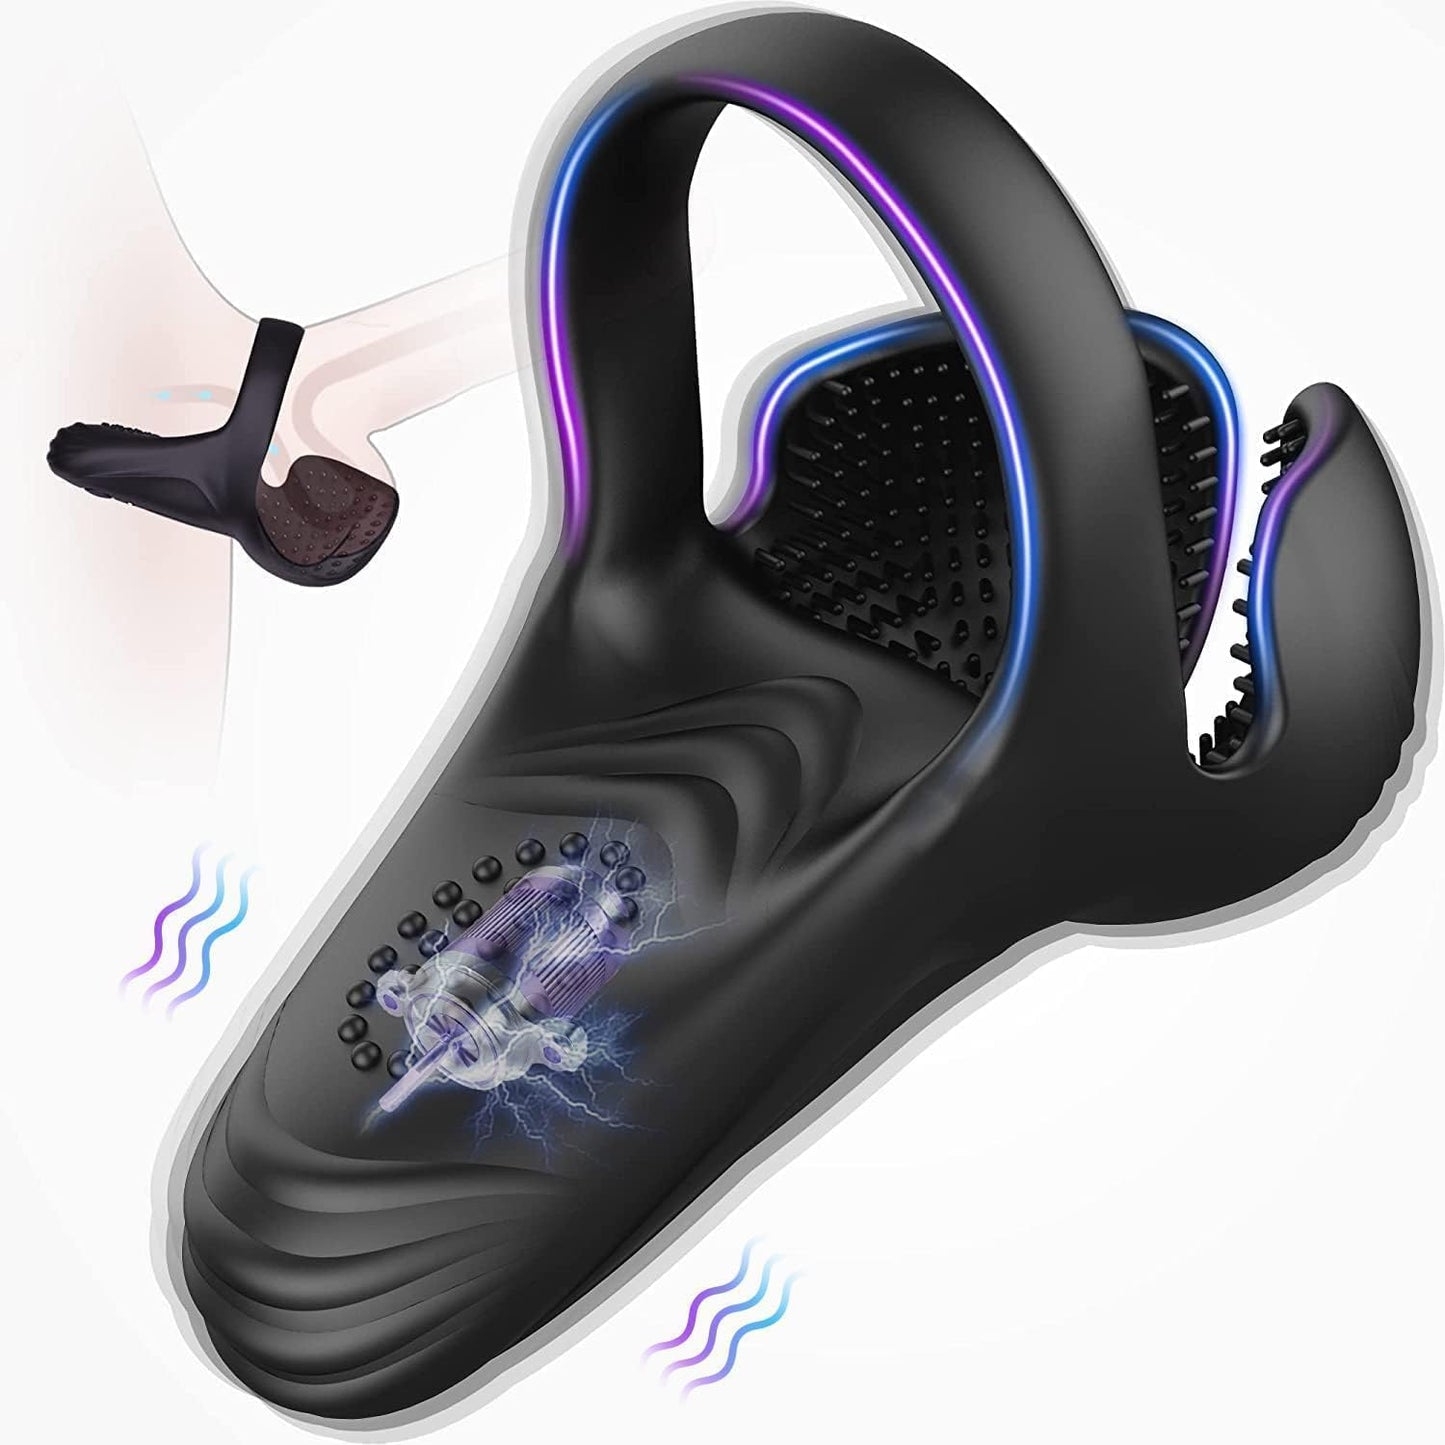 Cock ring vibrators with testicle vibration with 10 vibration modes 